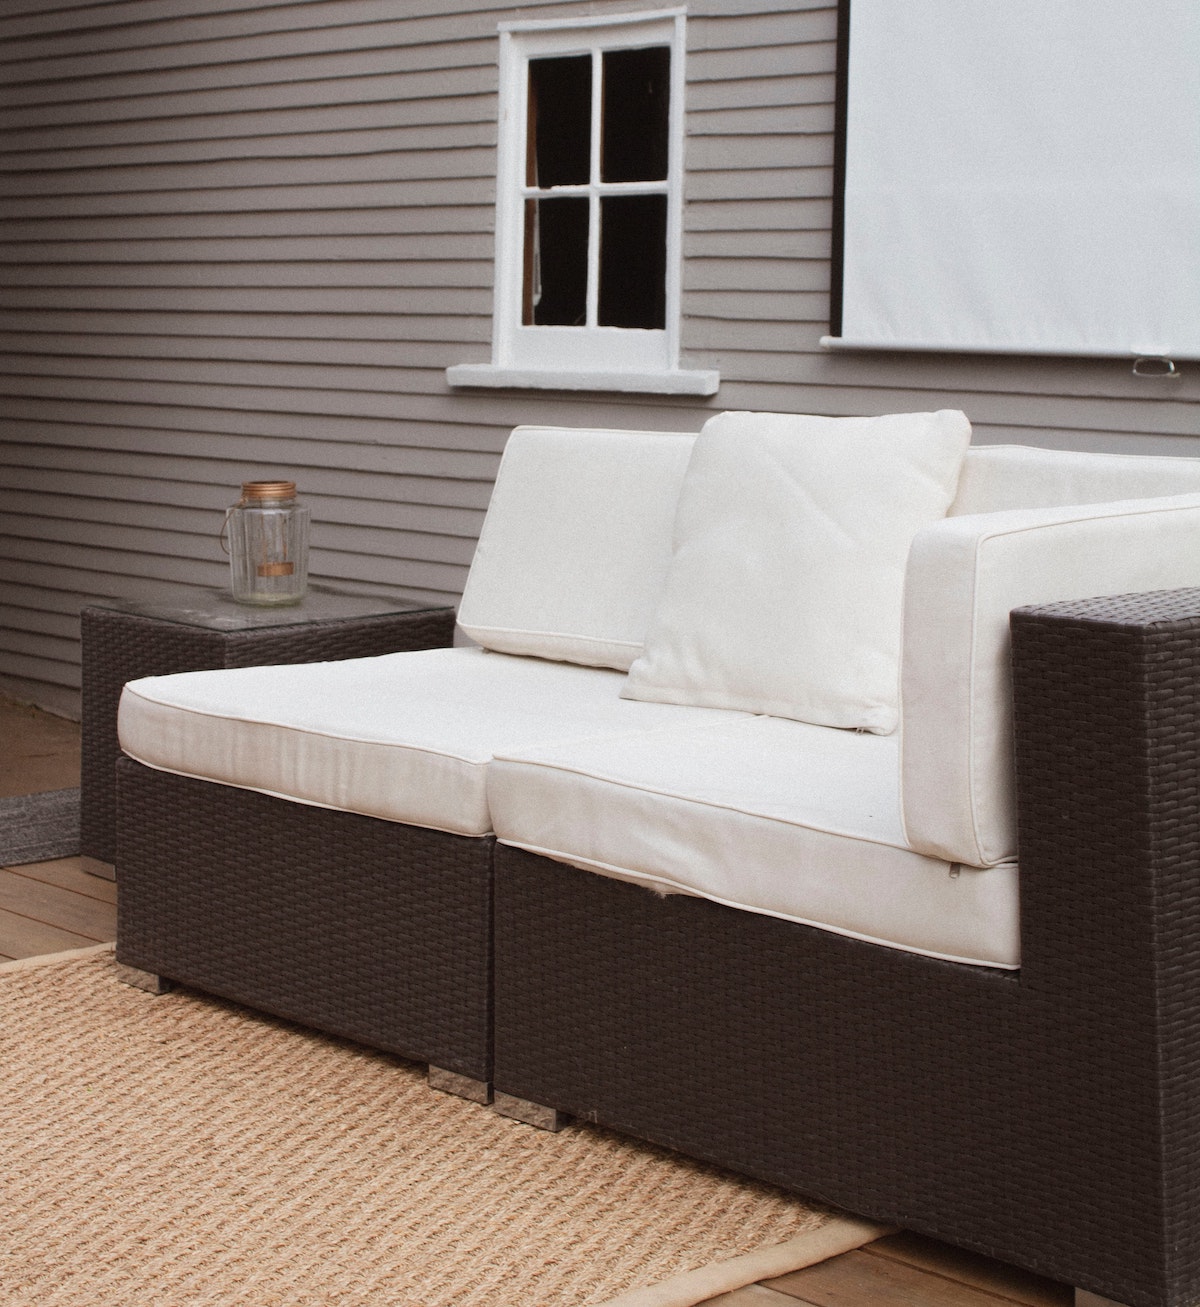 Is plastic synthetic resin outdoor furniture the best value for money?